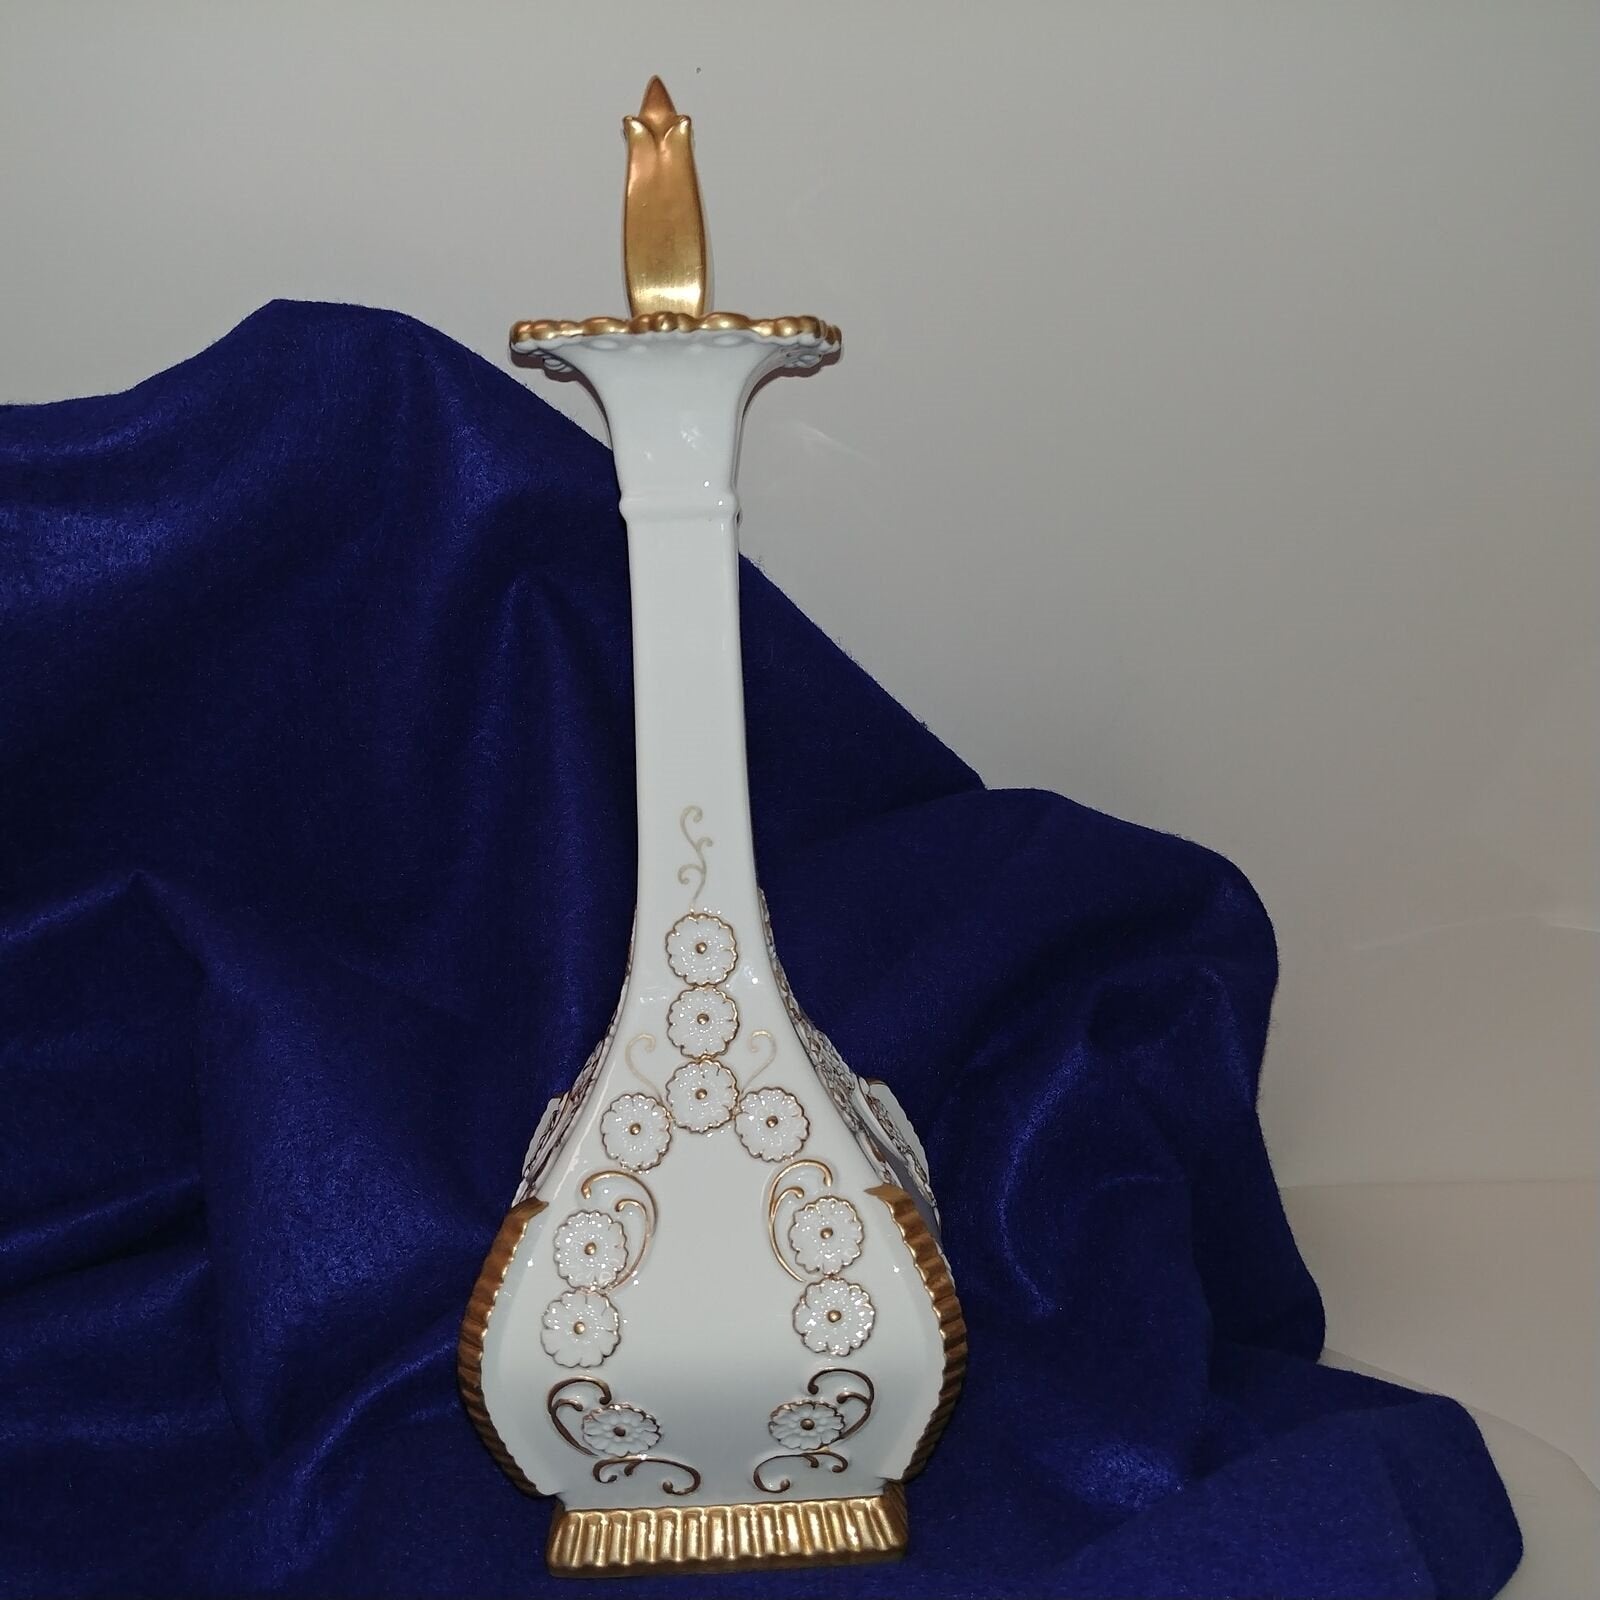 Porcelain Decanter Genie Style w/ Stopper Embossed 3-D Relief Design Gold Trim